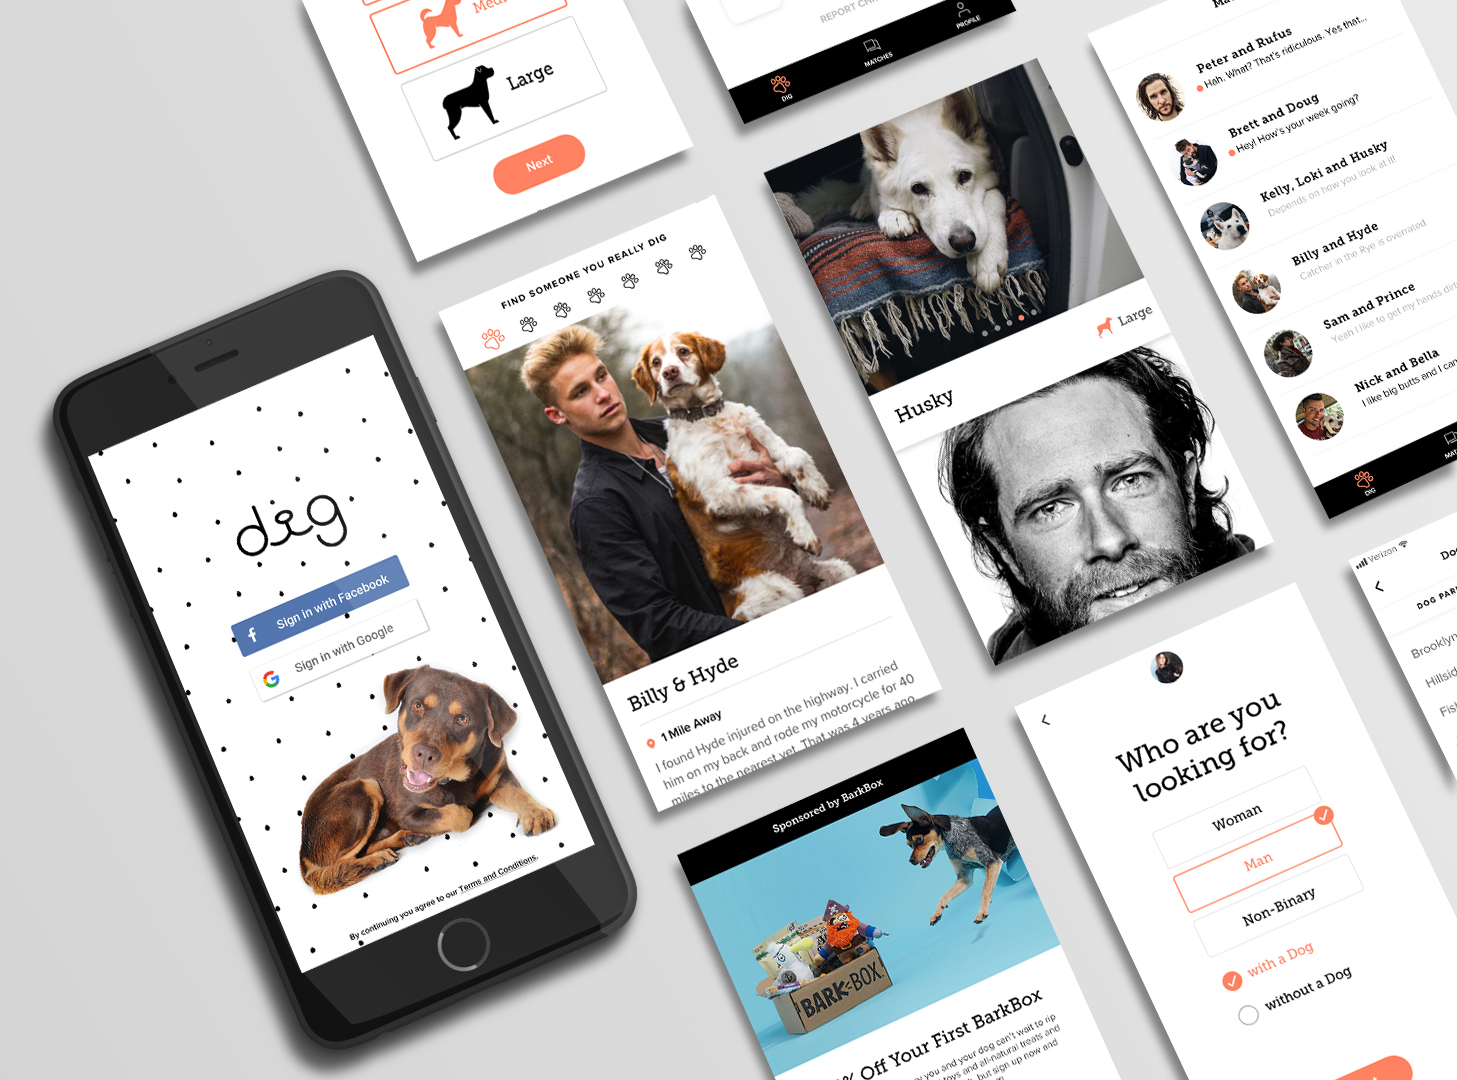 There&#8217;s a new dating app designed especially to help dog lovers connect, The Manc